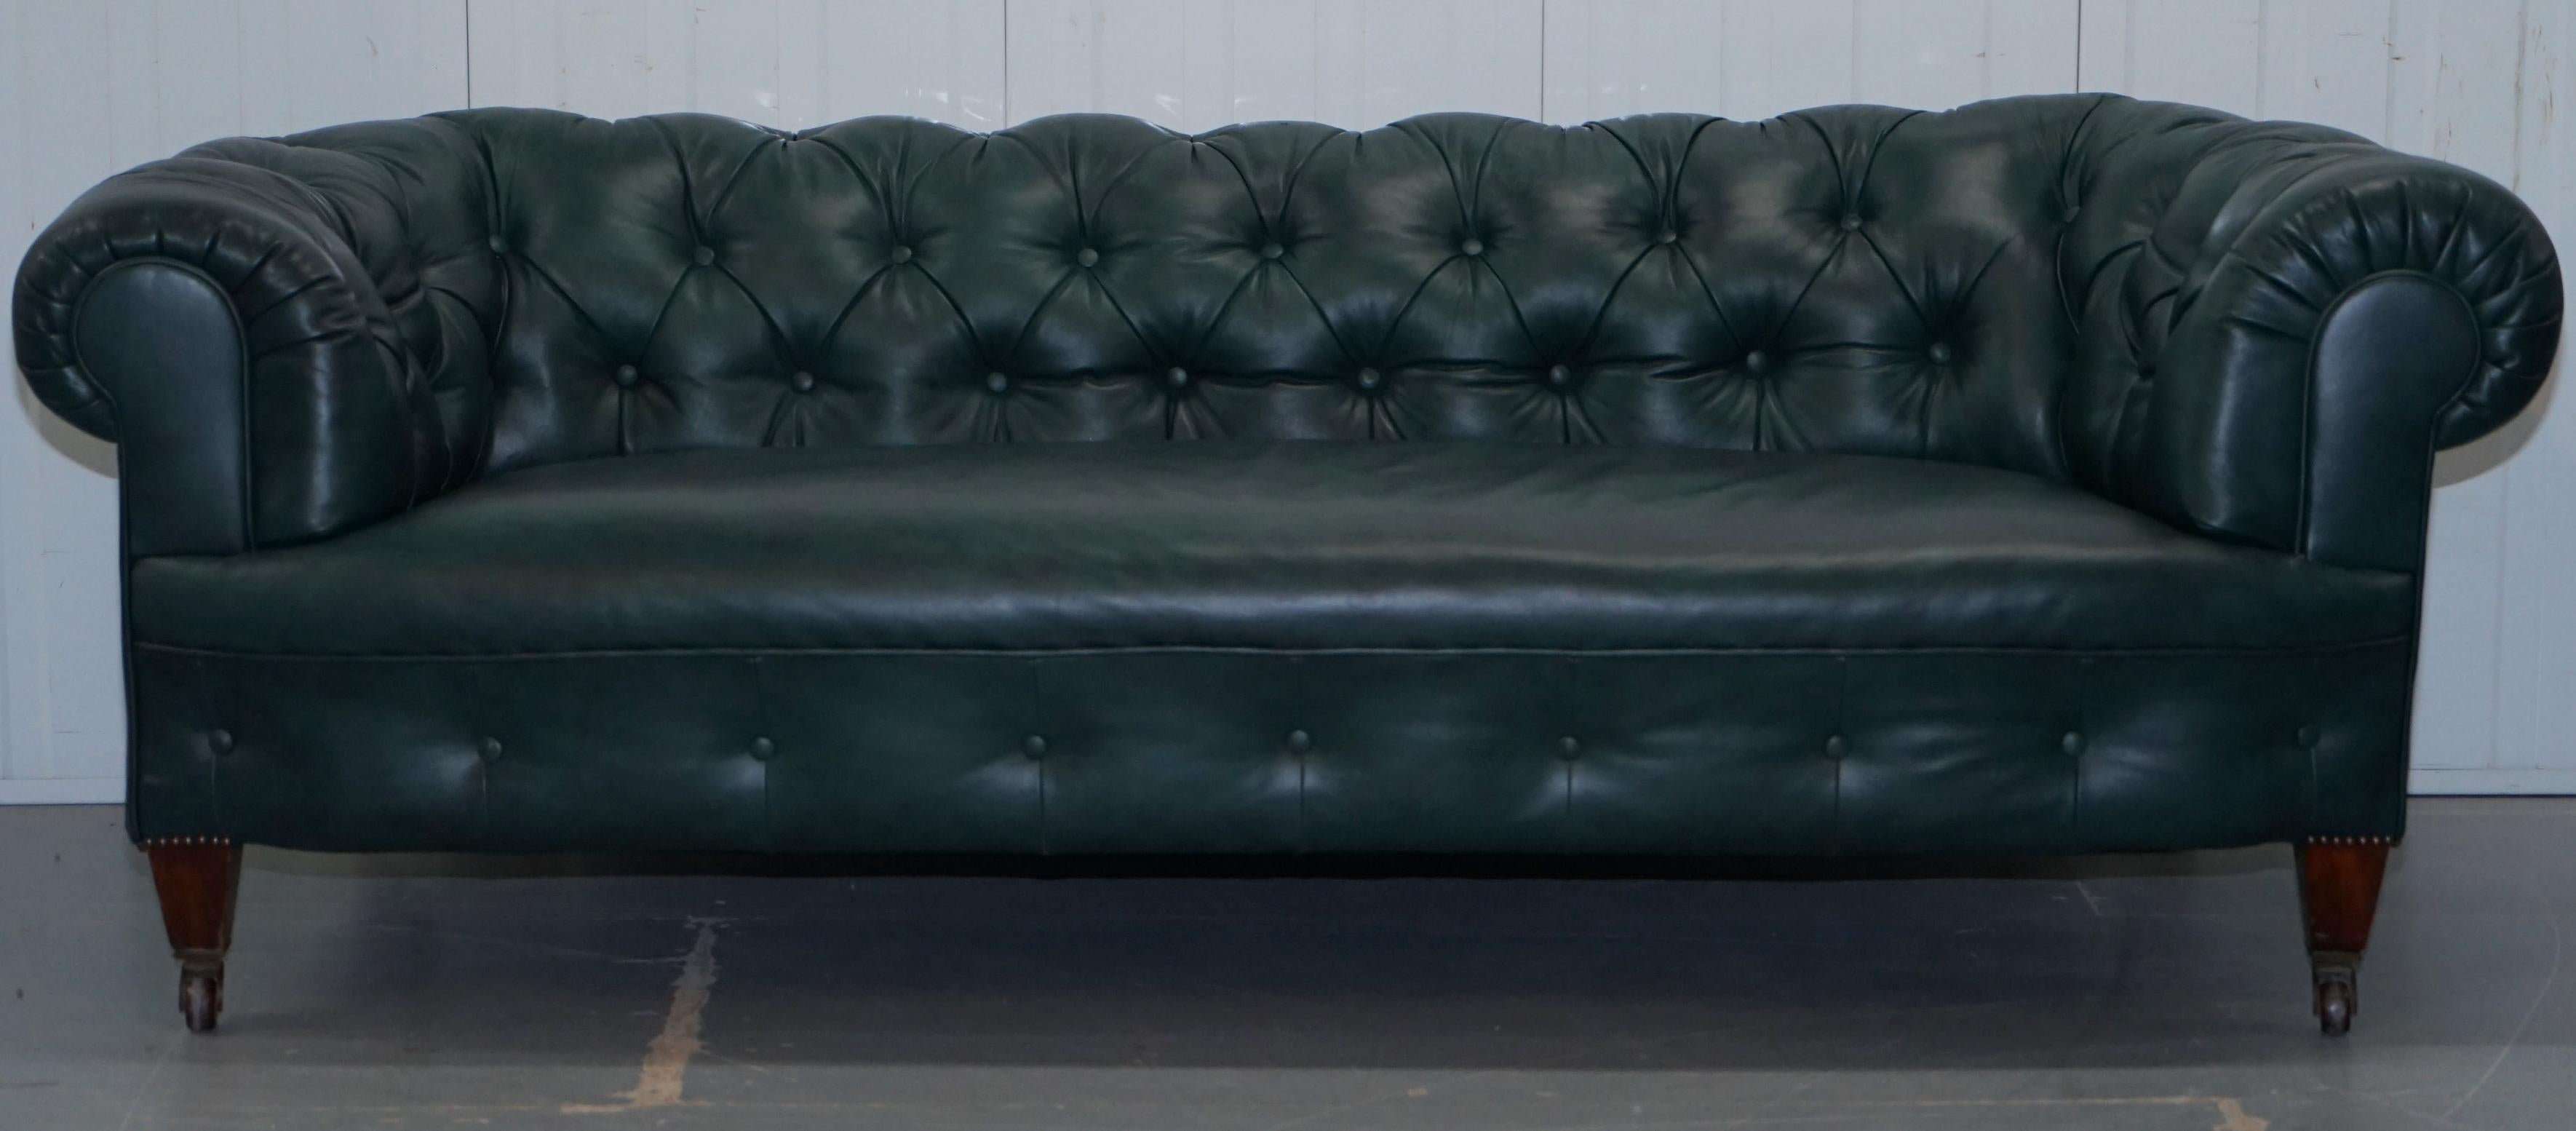 We are delighted to offer for sale this lovely rare original restored Victorian 1890 Cornelius V Smith green leather Chesterfield sofa

What can I say, if you’re in the market for the best Victorian Chesterfield sofas in the world there are a few